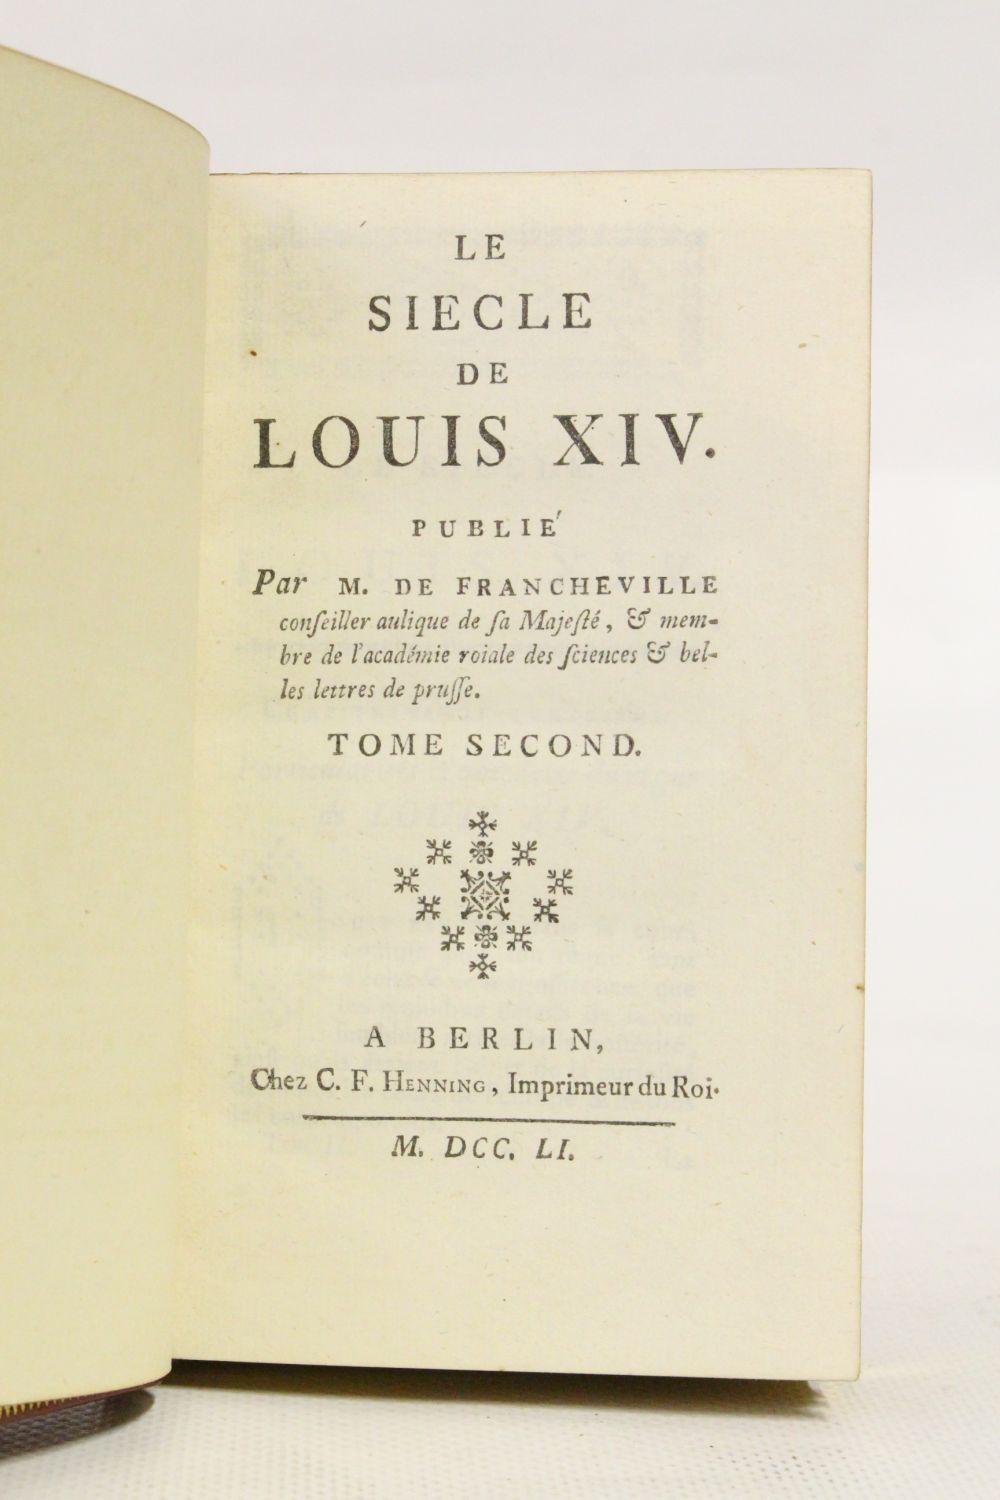 The Works of Voltaire, Vol. XII (Age of Louis XIV)